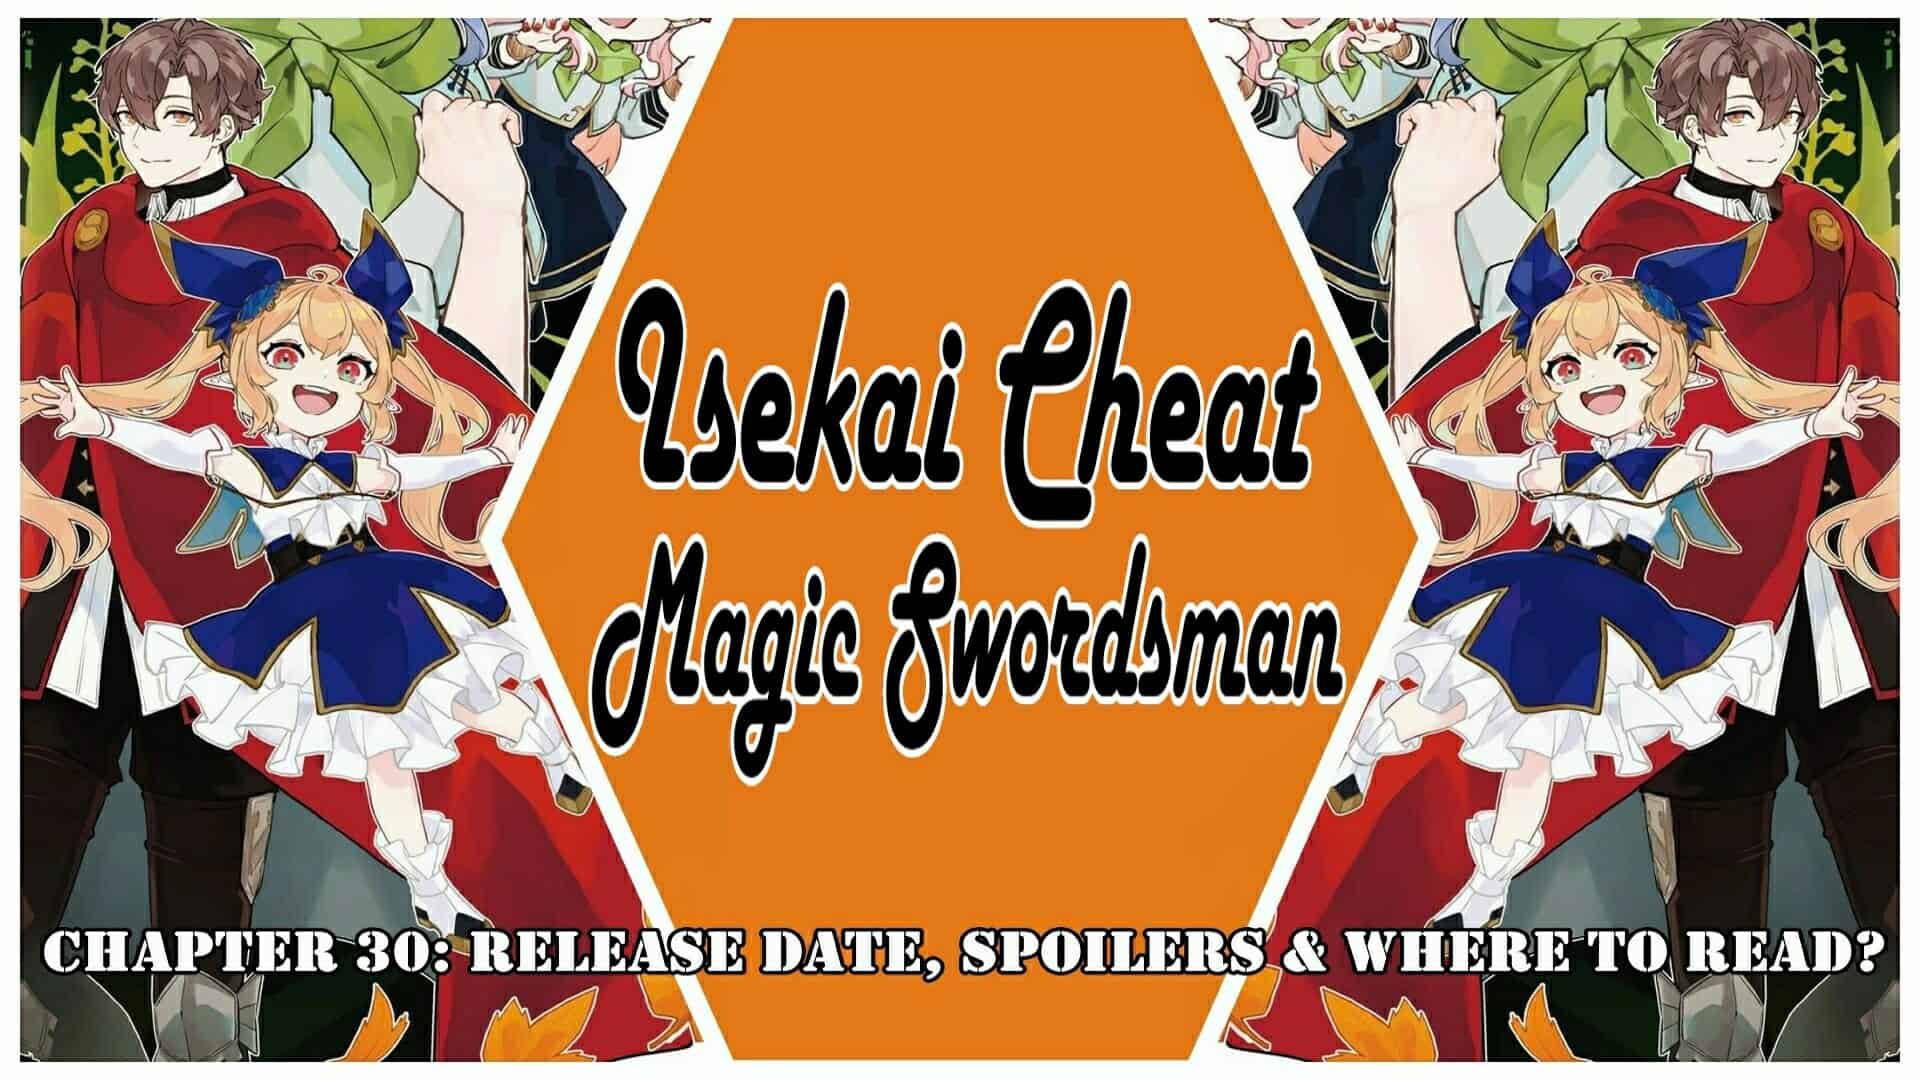 Lost Ones from Another World, Isekai Cheat Magician Wiki